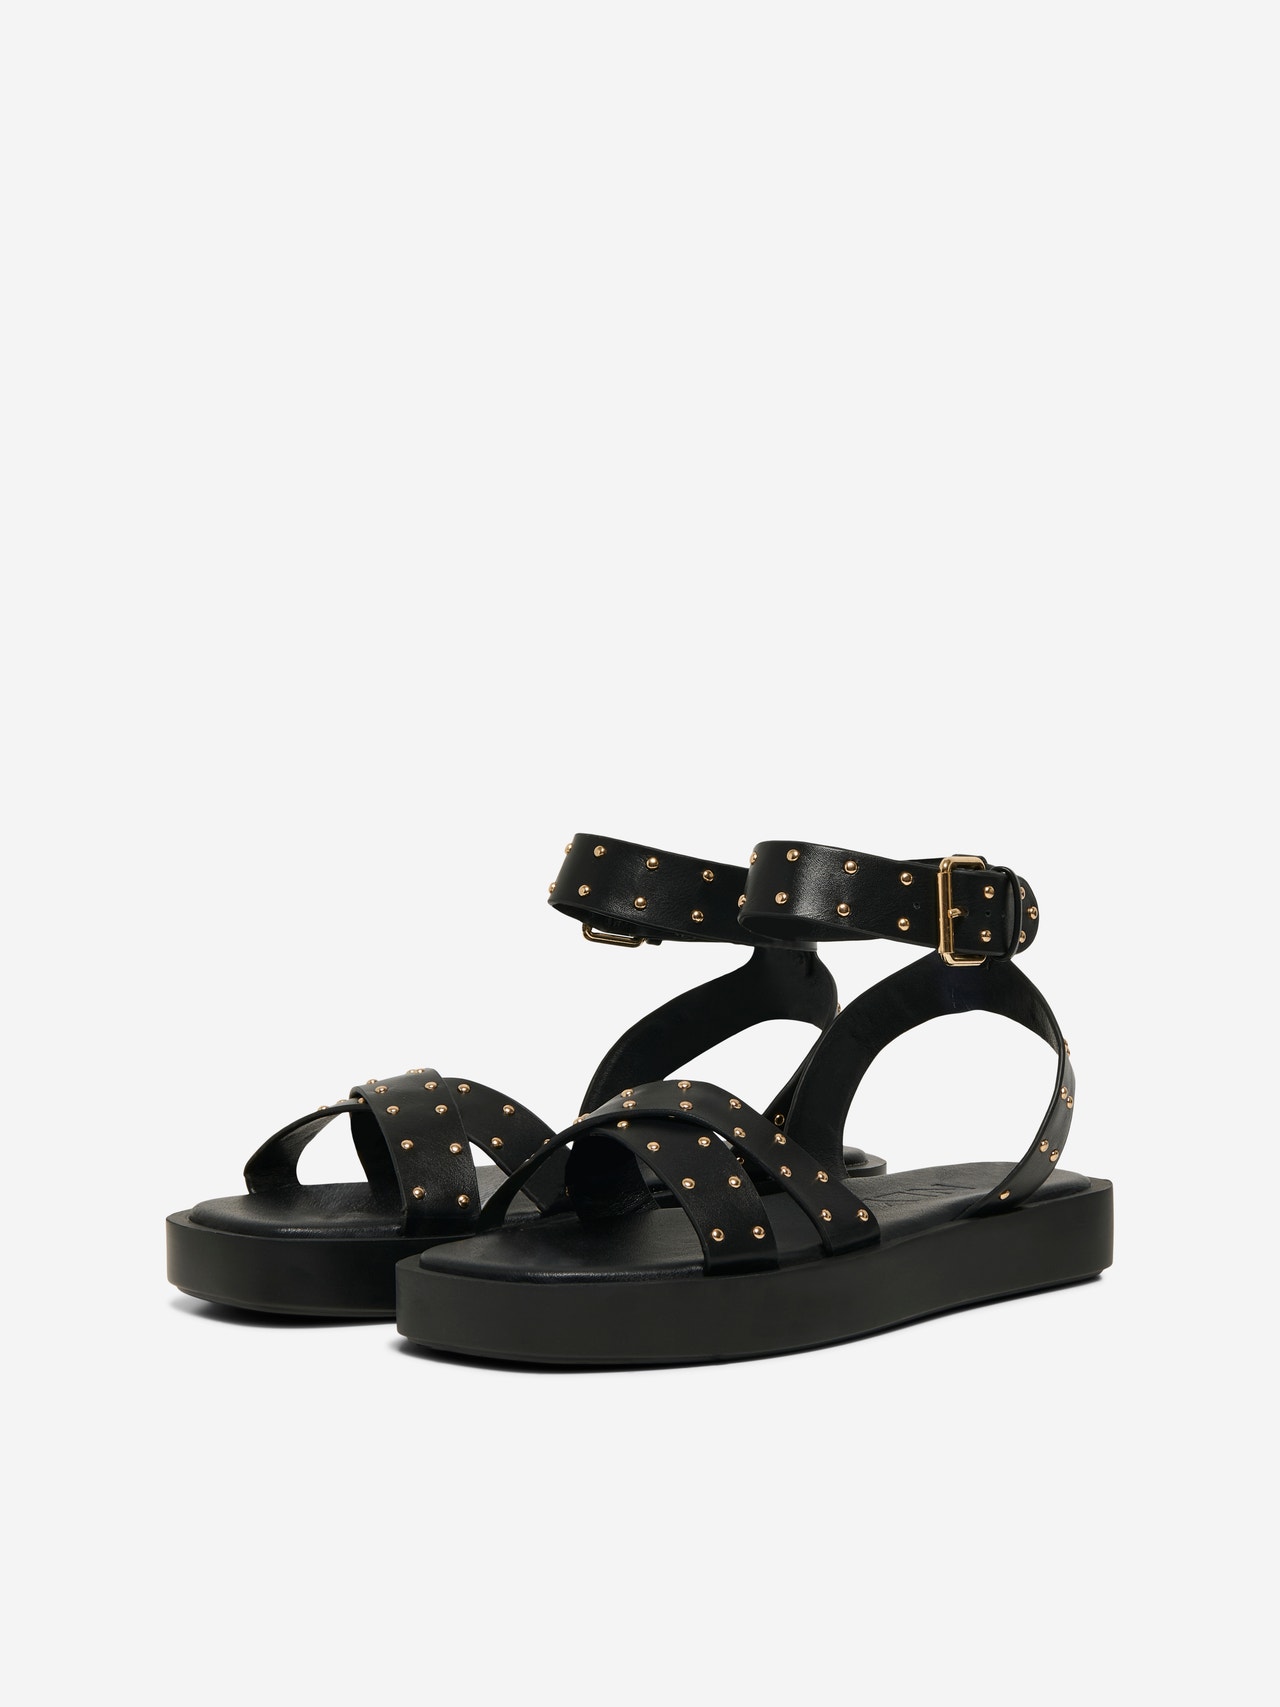 ONLY Sandals with studs -Black - 15335559